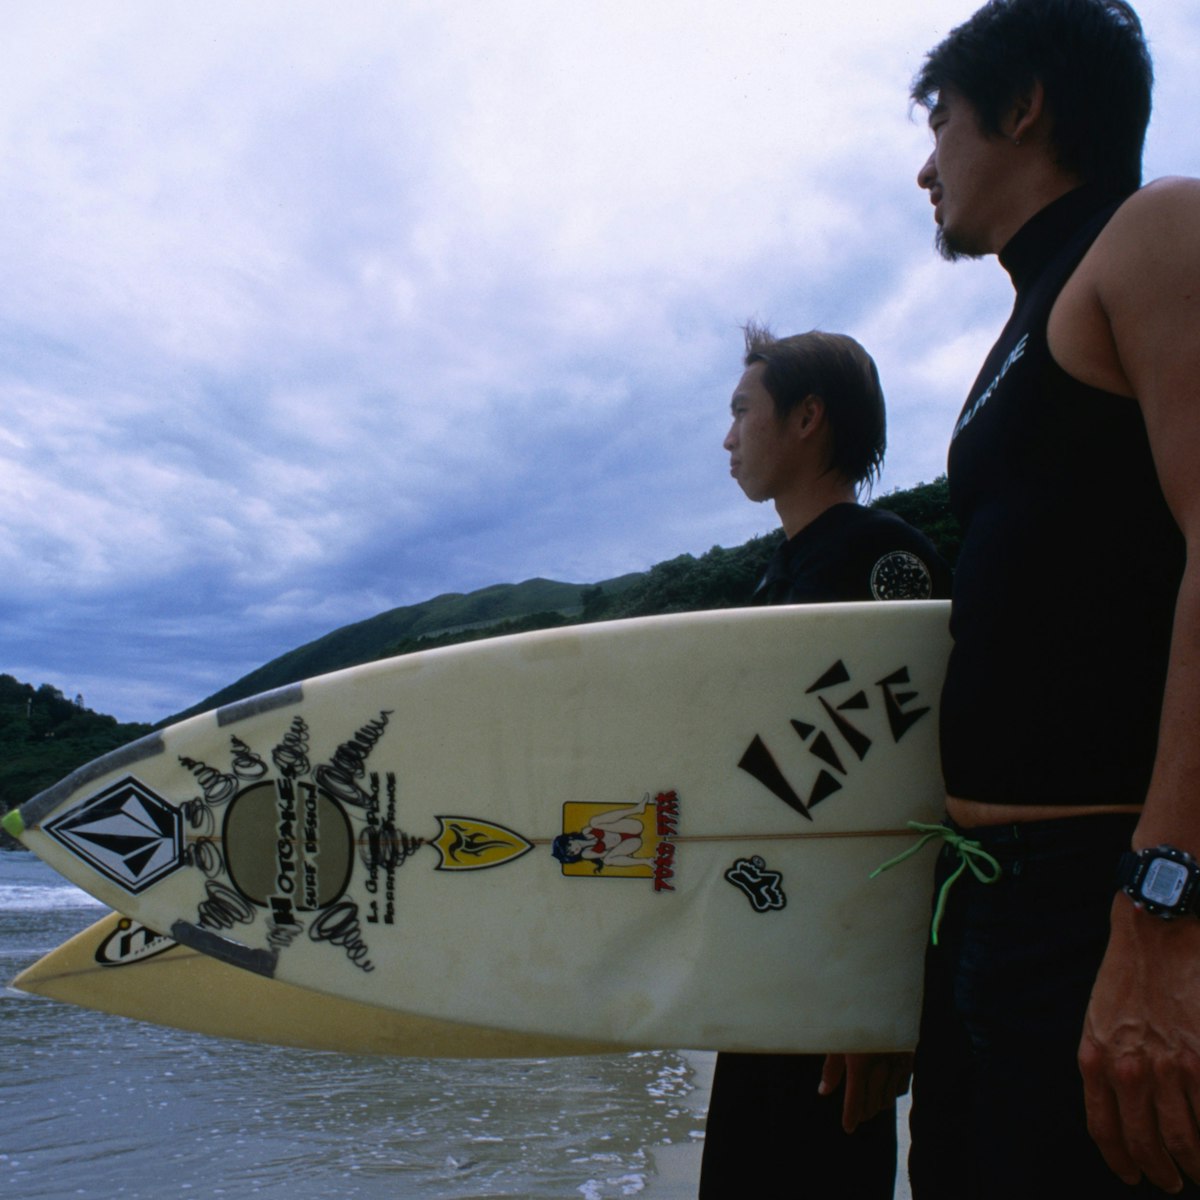 Local surfers size up the waves at Shek O's 'Big Wave Beach'.